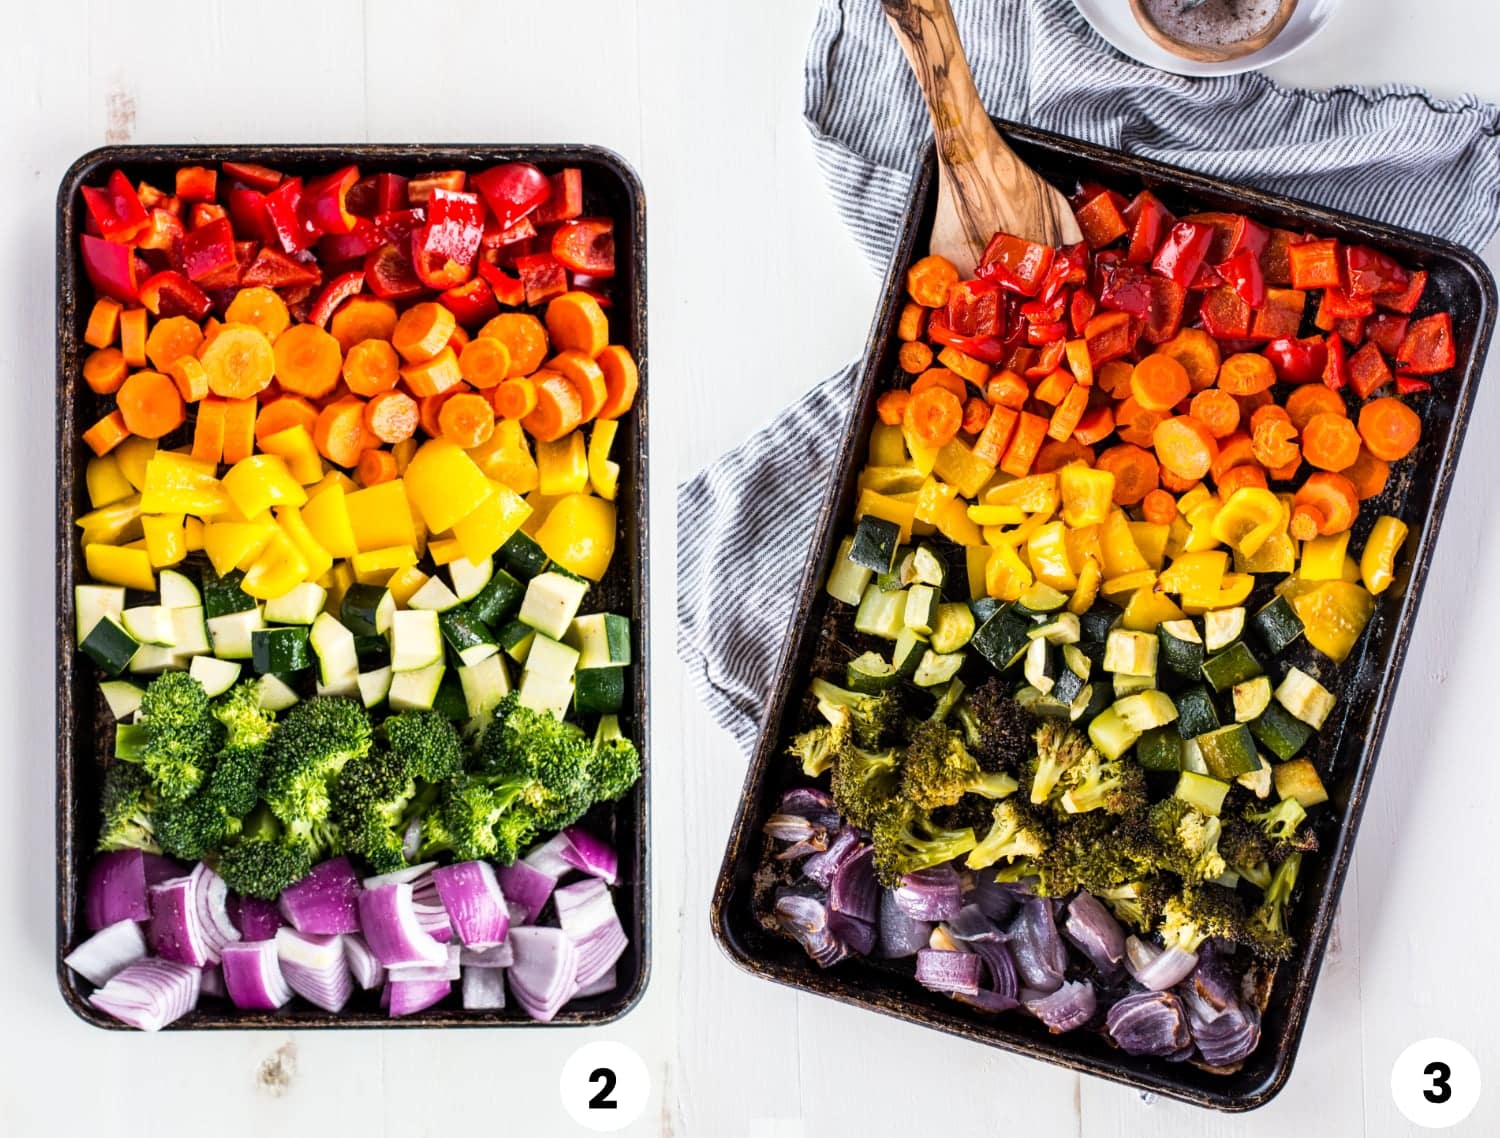 The vegetables on the sheet pan before and after being roasted in the oven.